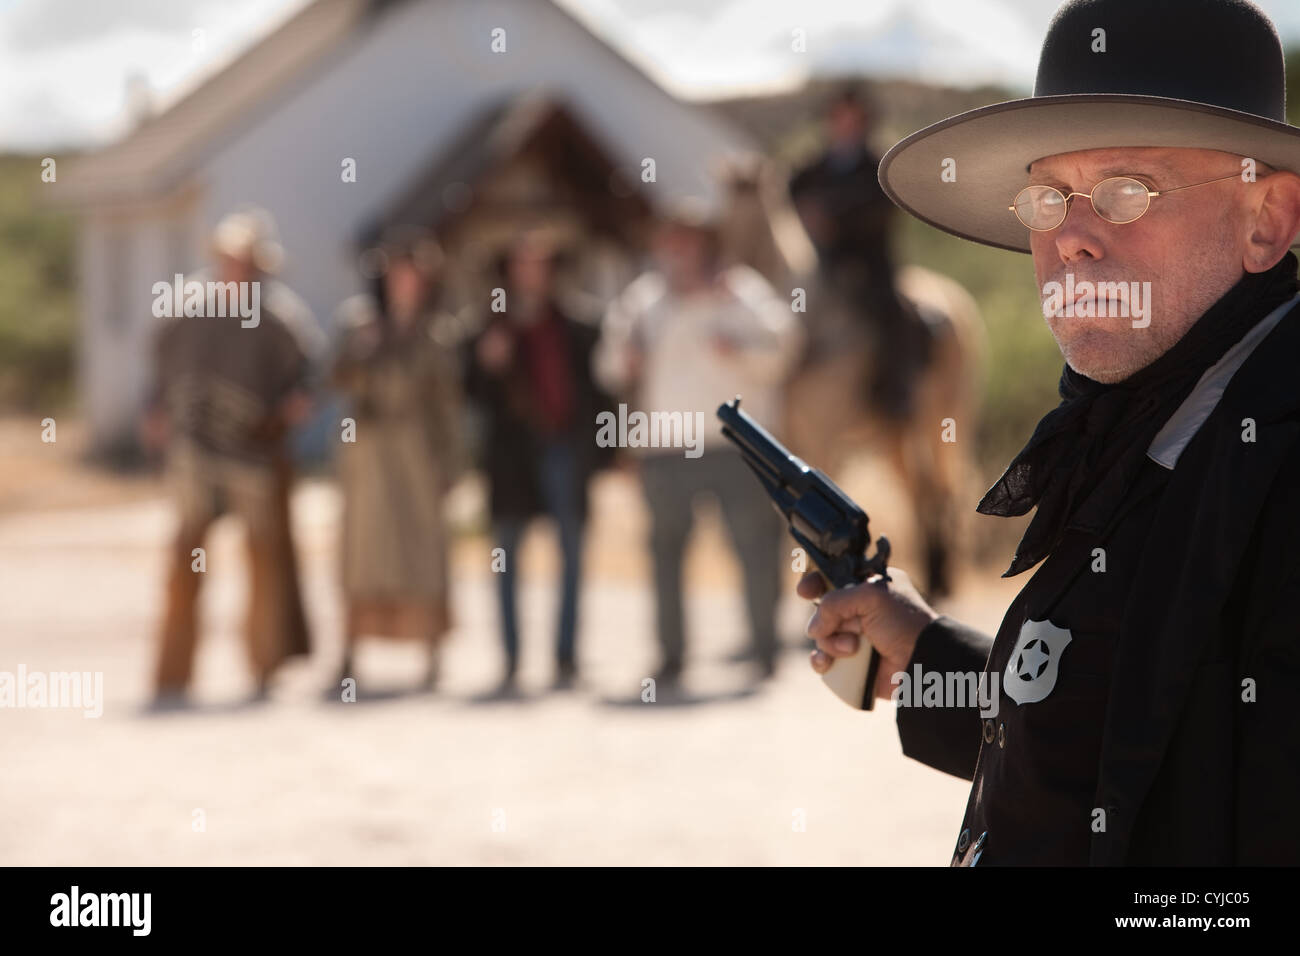 Outgunned sheriff in old American west showdown Stock Photo